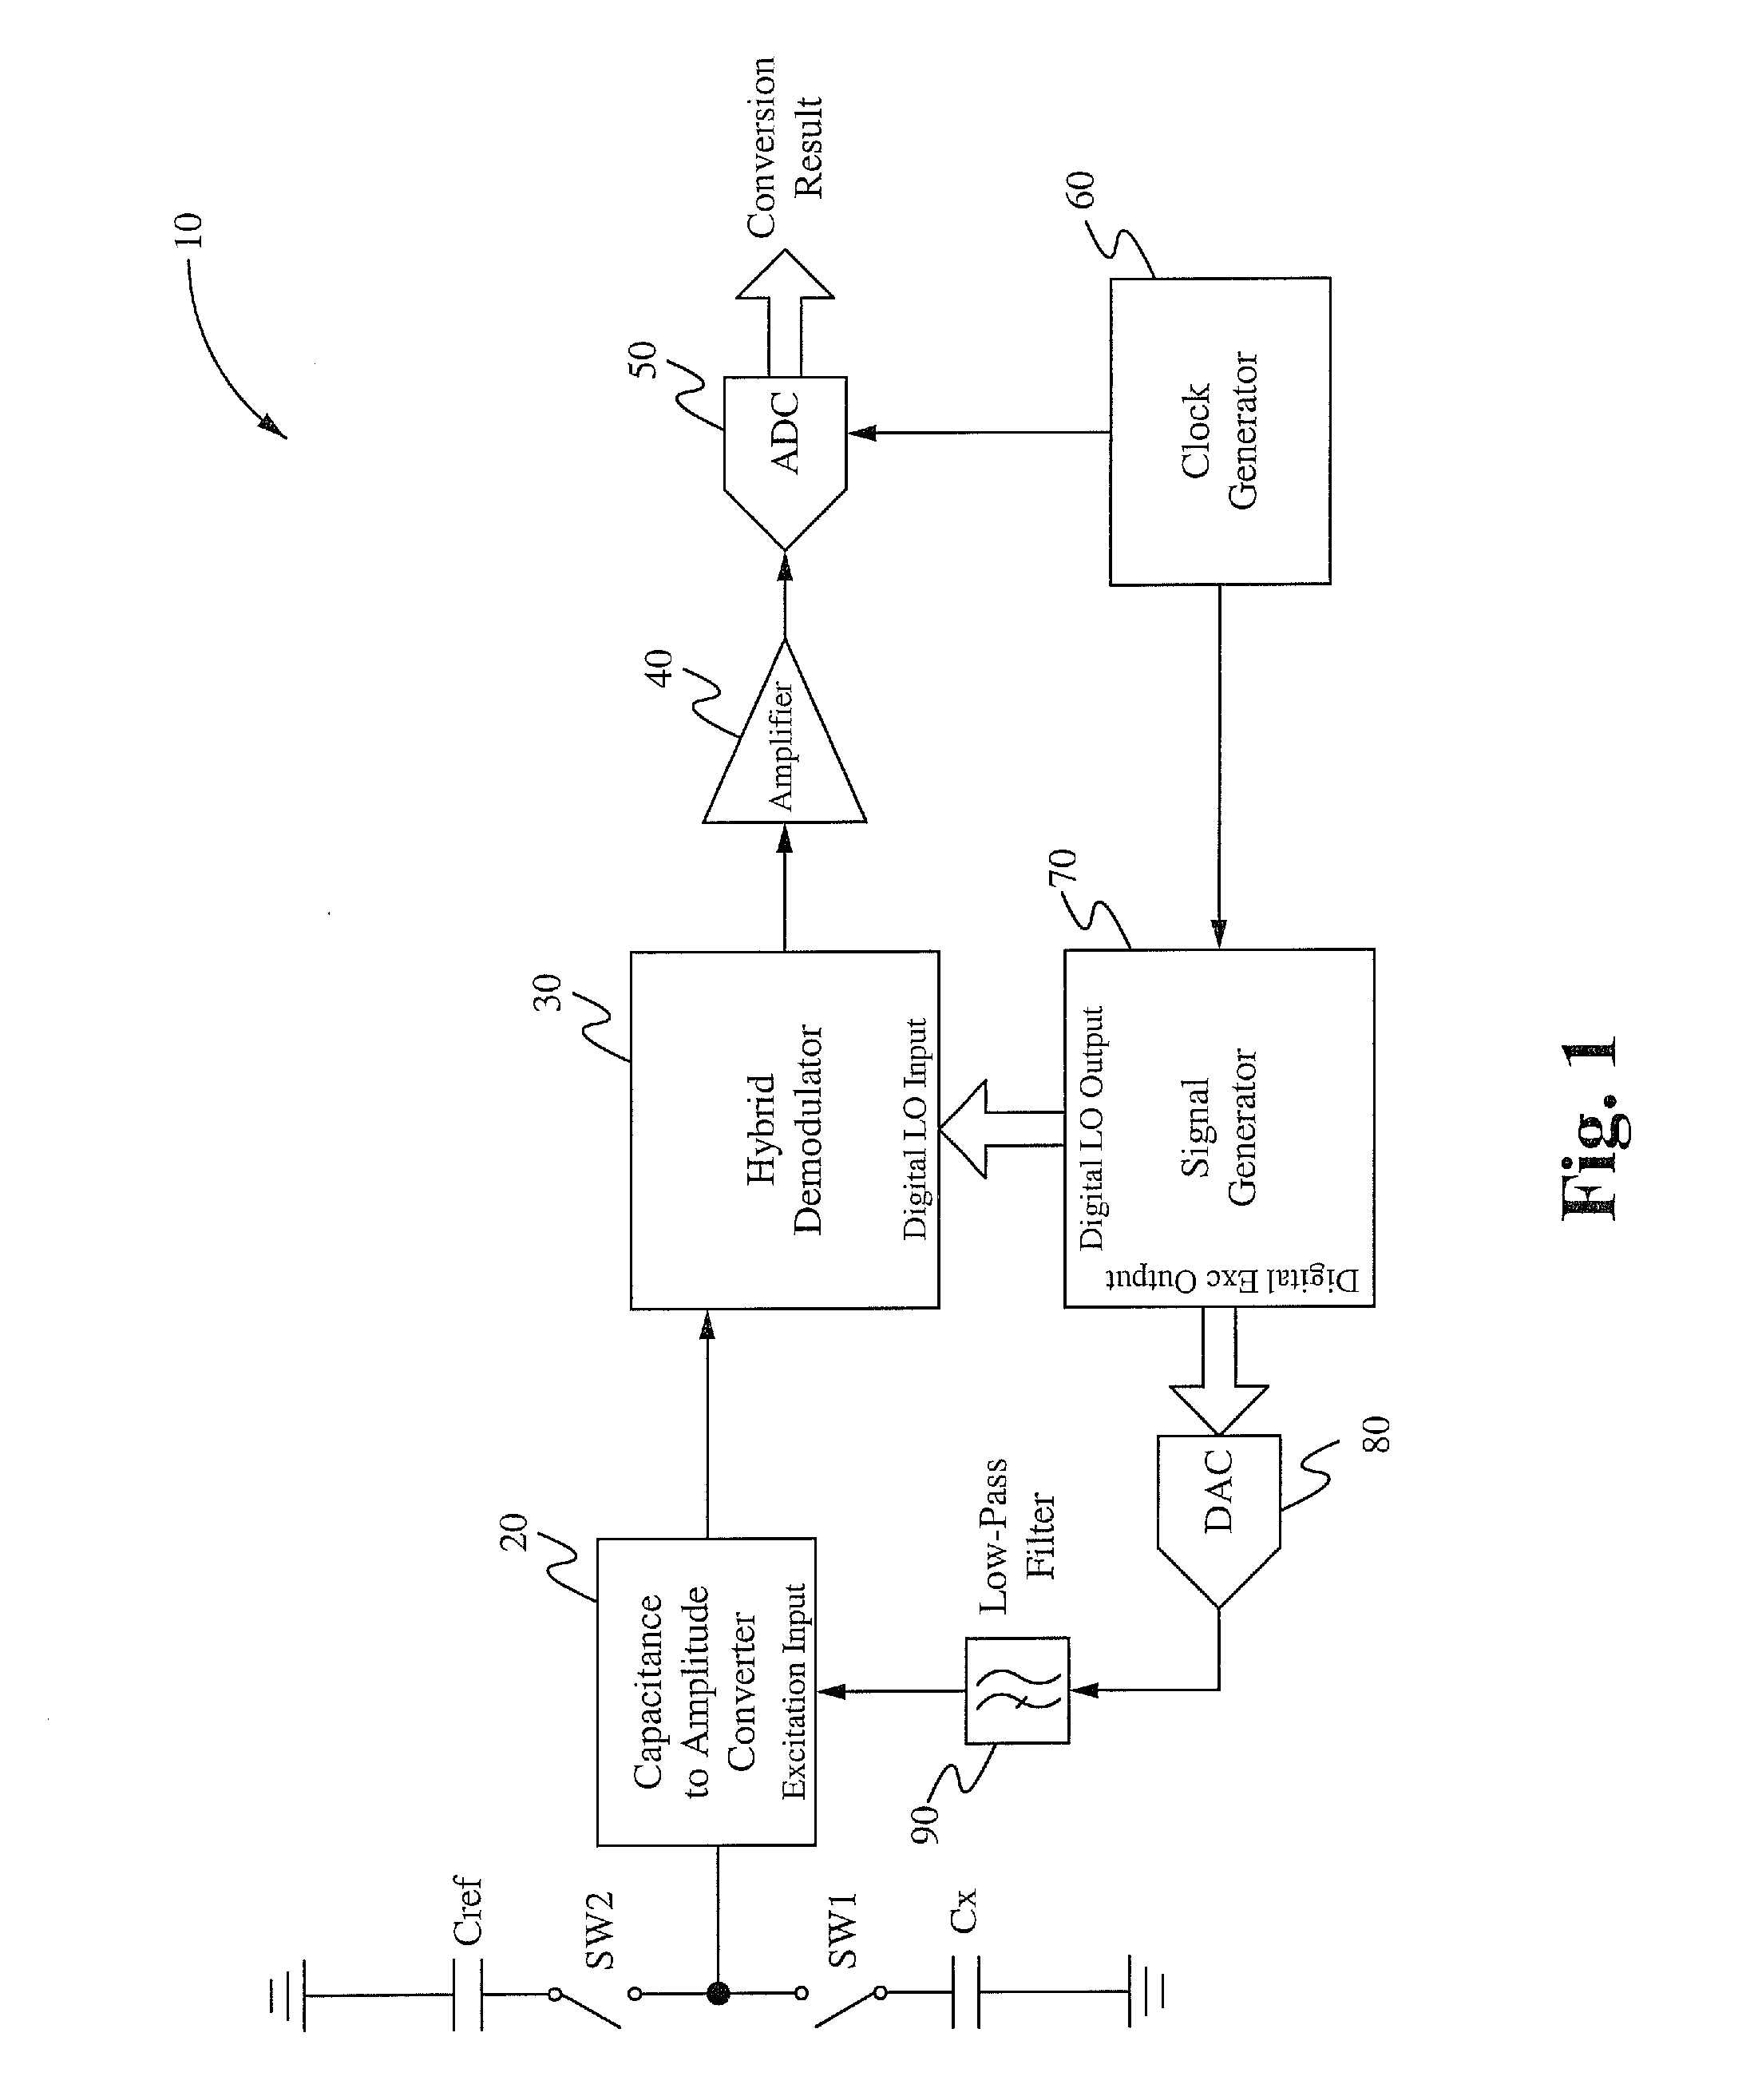 Method and apparatus for sensing capacitance value and converting it into digital format